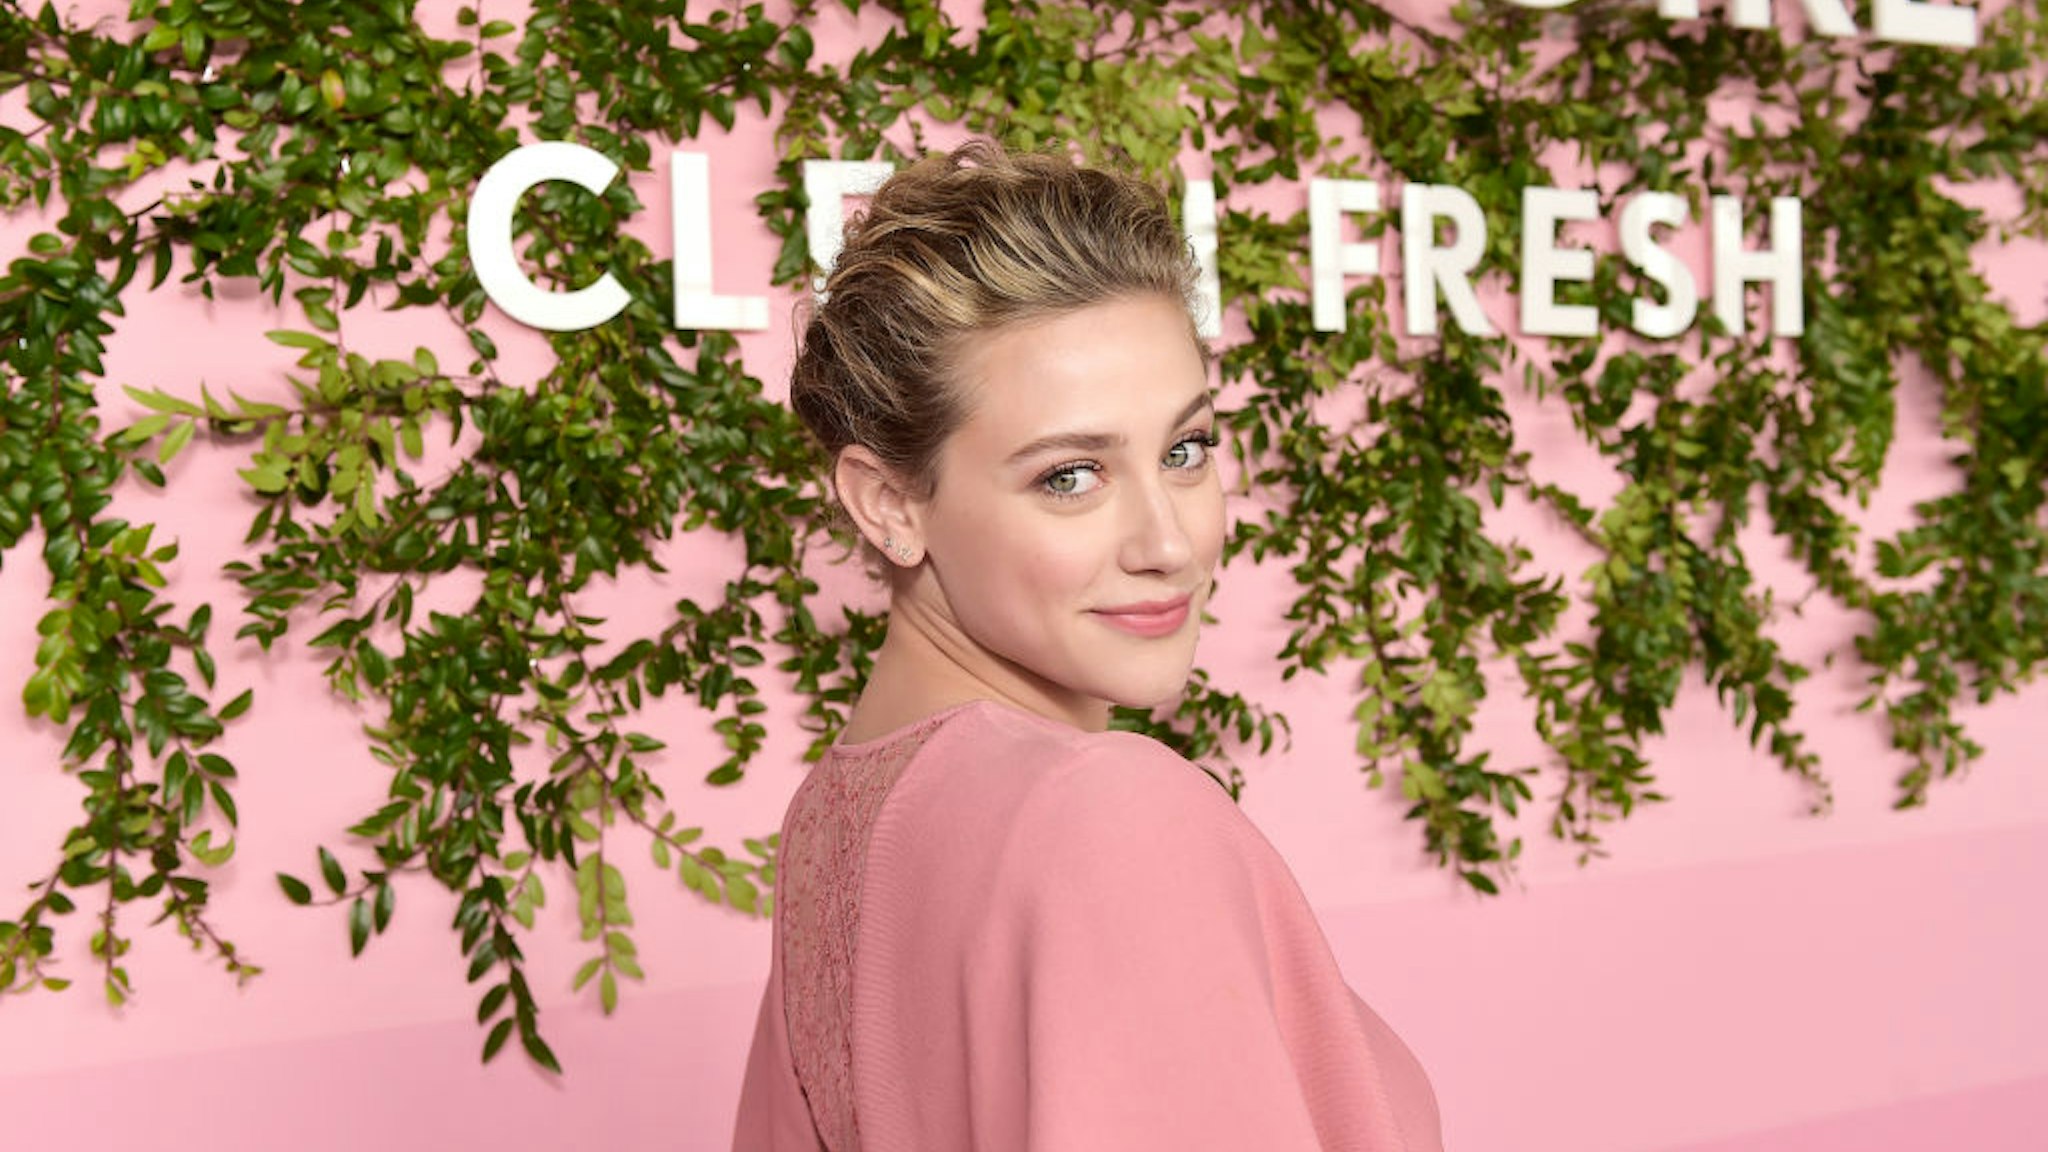 Lili Reinhart attends Covergirl Clean Fresh Launch Party on January 16, 2020 in Los Angeles